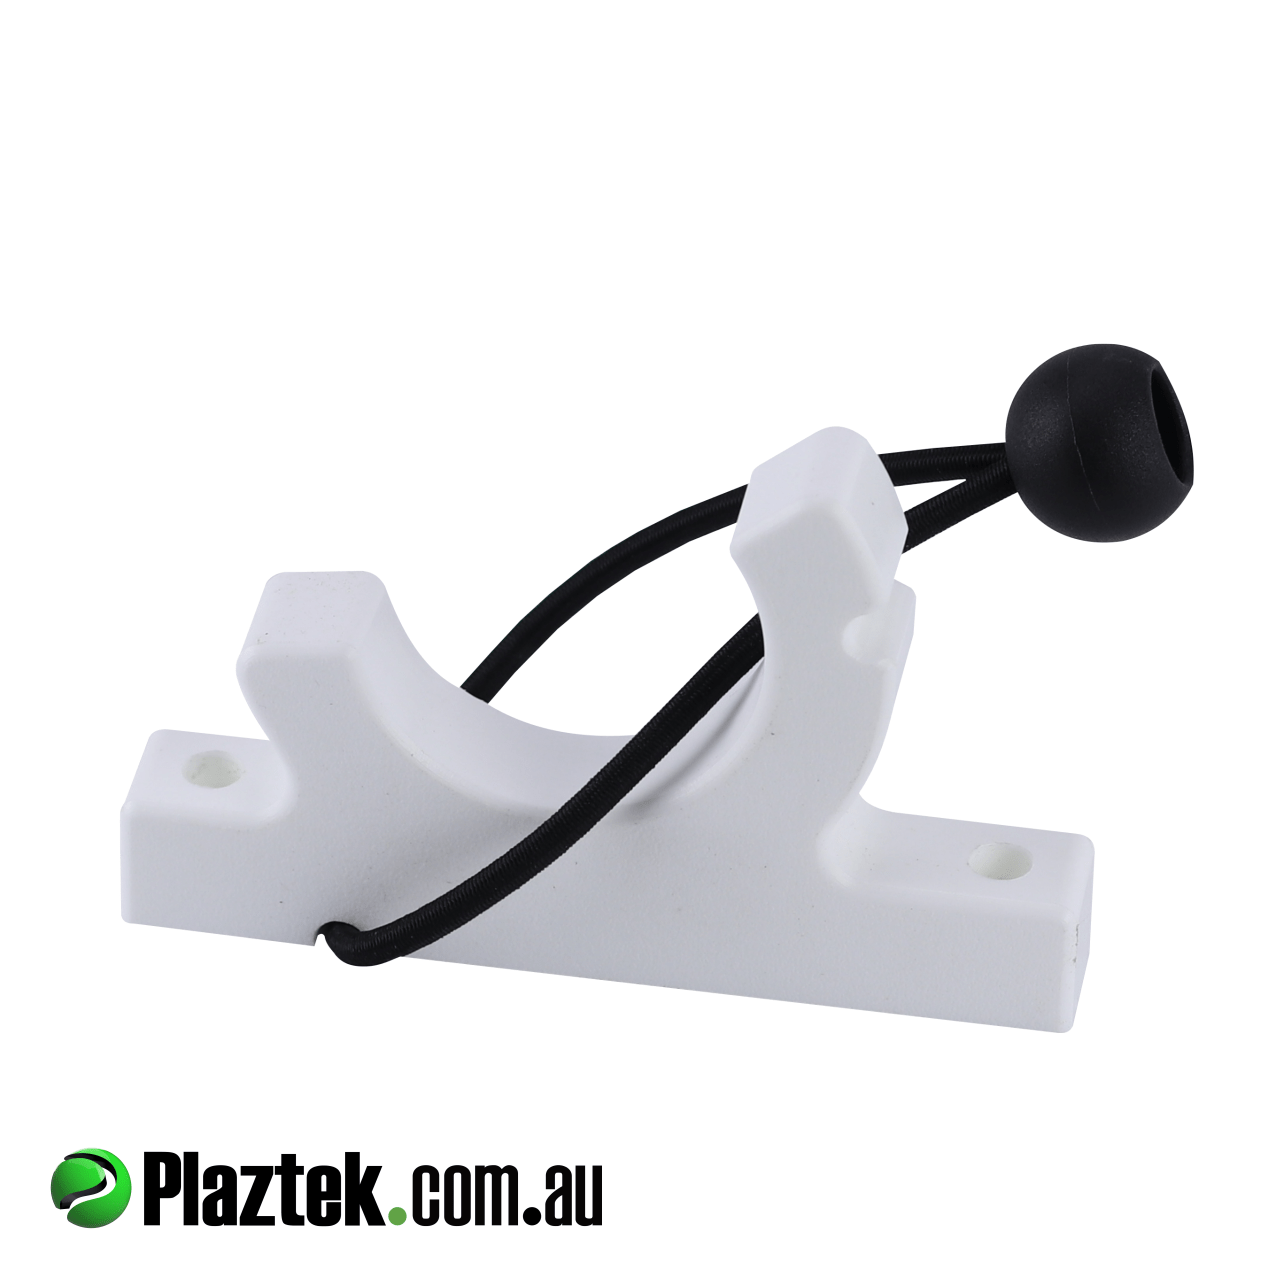 Yappy pump holder by Plaztek in white/white king starboard, screwed fixing with no backing plate